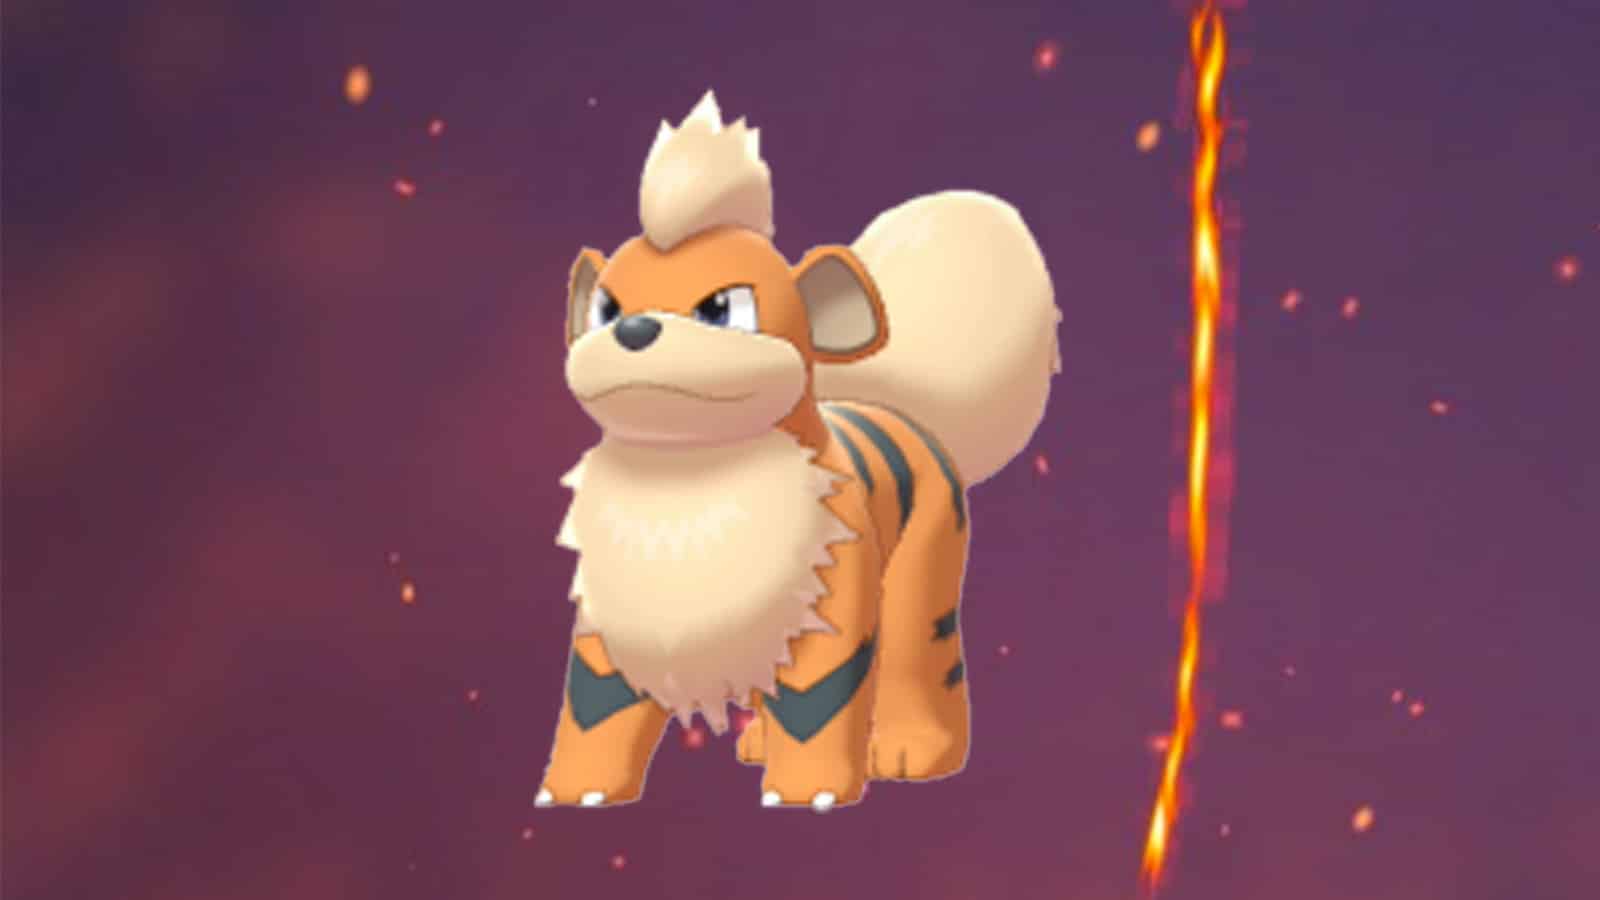 Growlithe appearing in Pokemon Go